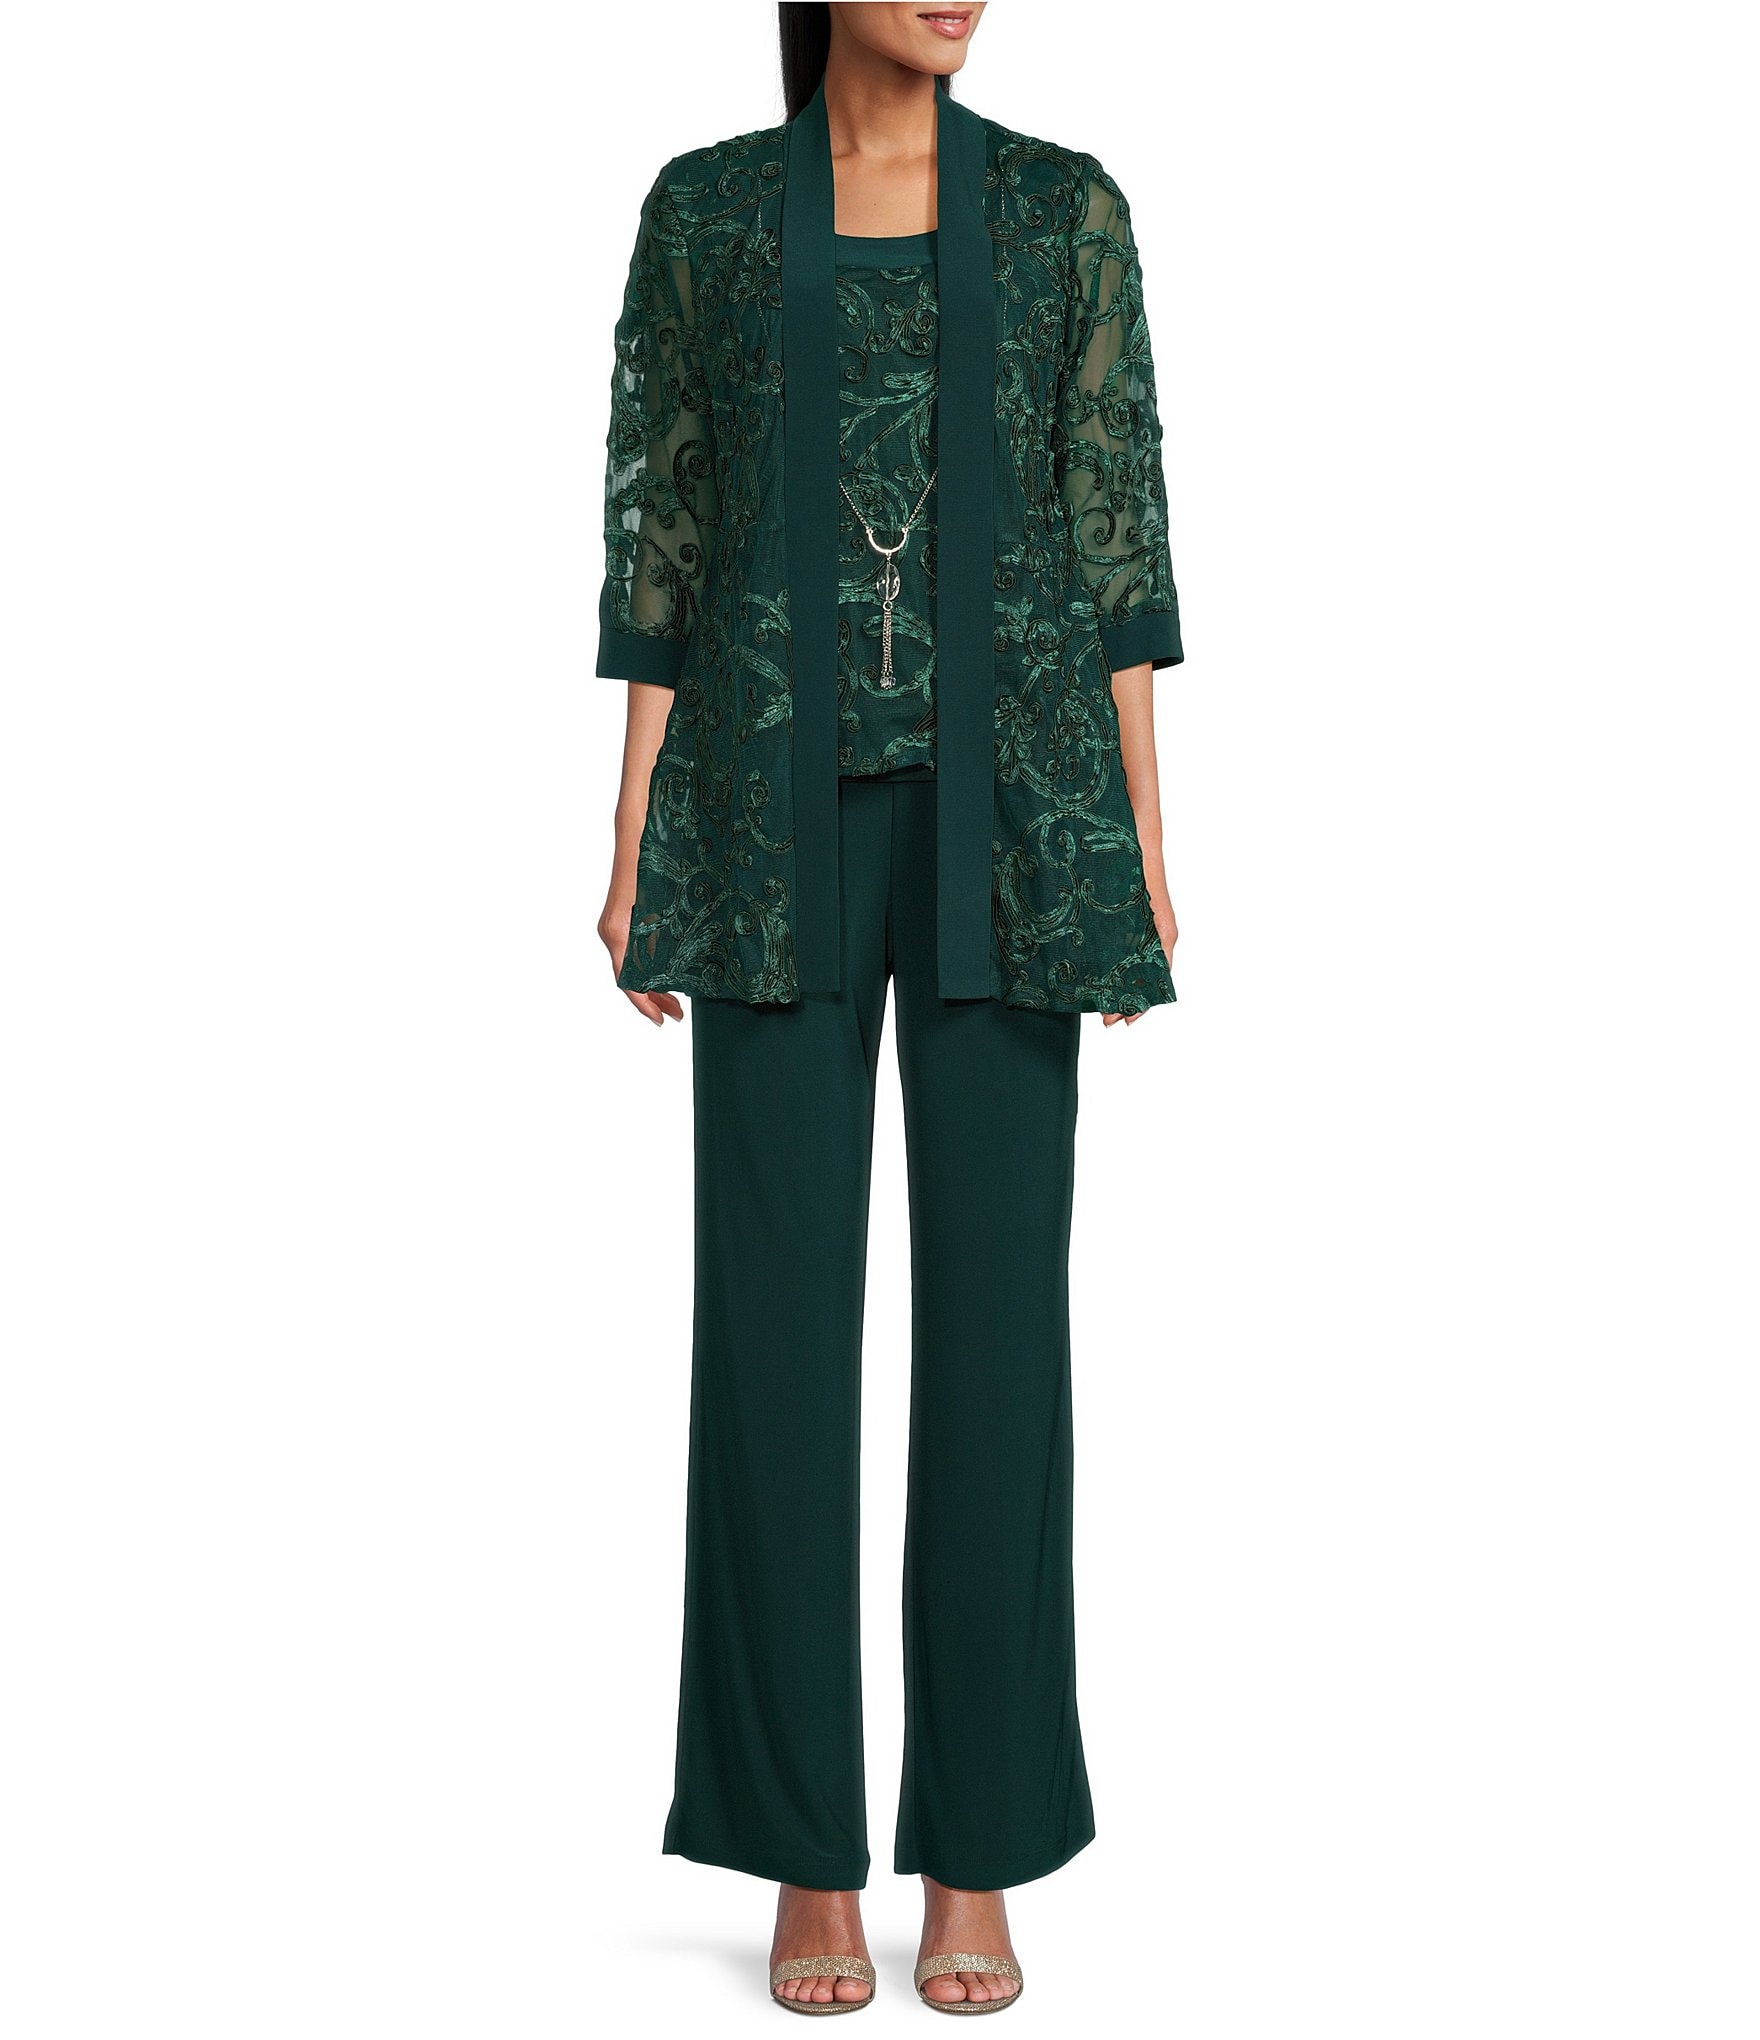 R&M Richards 7772 Mother Of The Bride Formal Pant Suit for $69.99